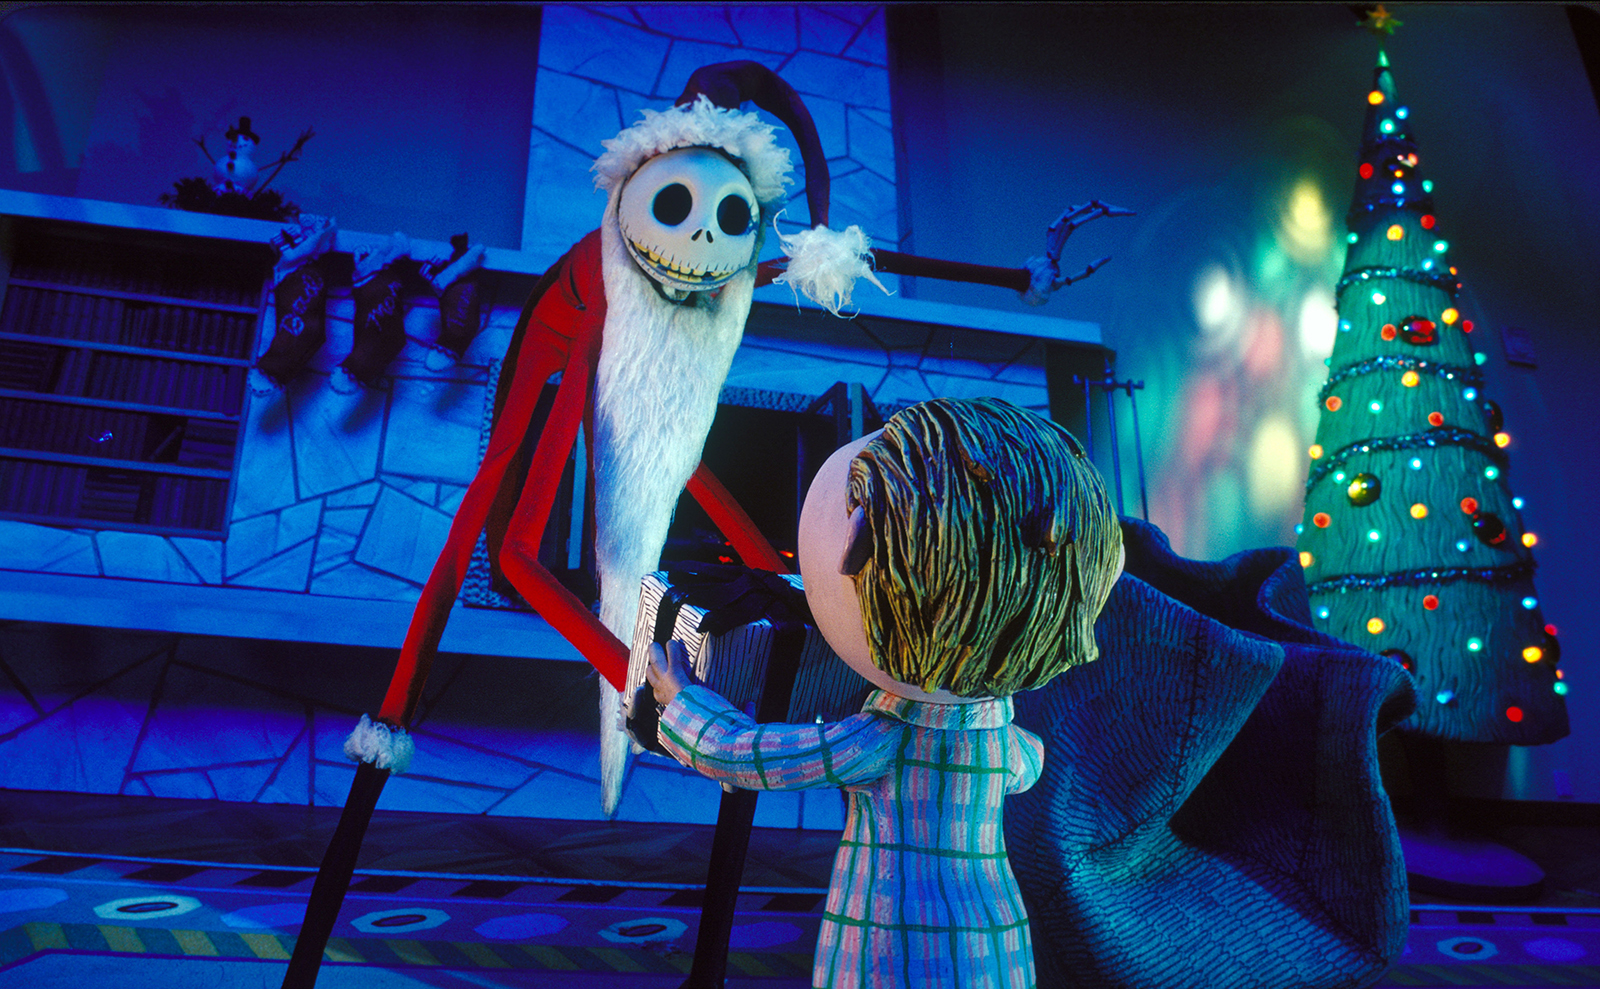 A skinny skeleton wearing a Santa suit gives a gift to a child with a Christmas tree on the right side.